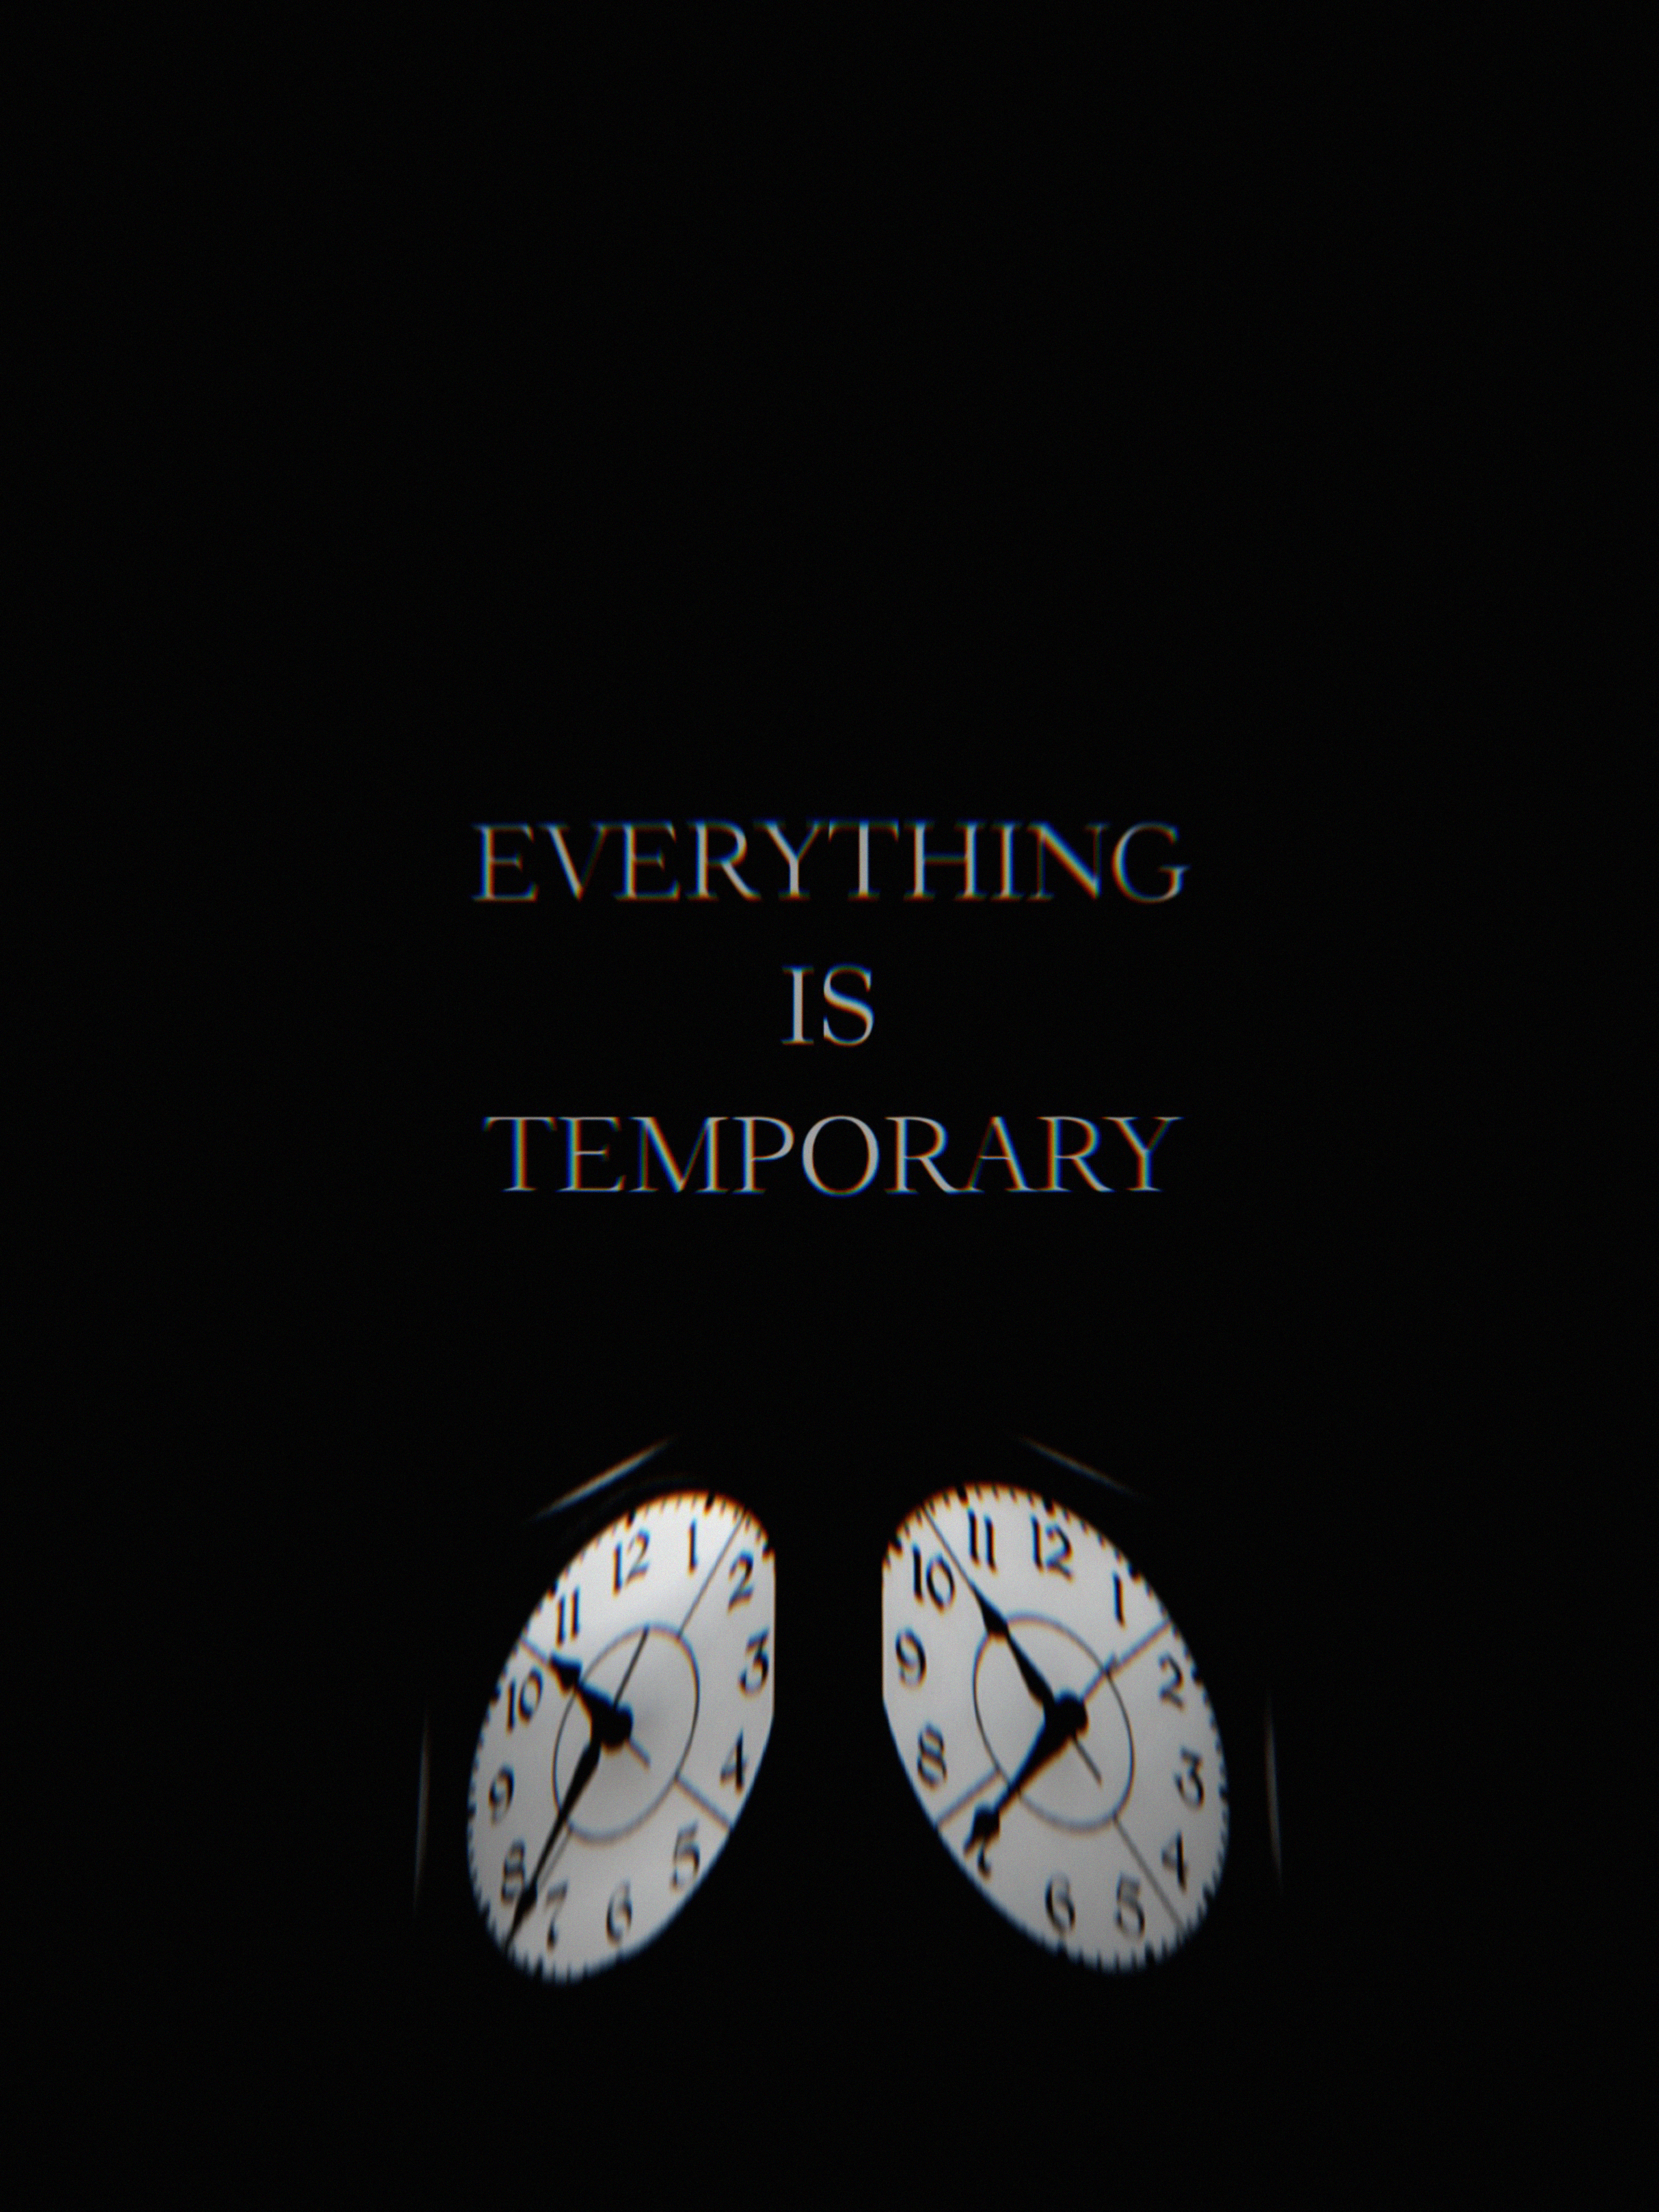 life, words, clock, glitch, time, it's time, temporary